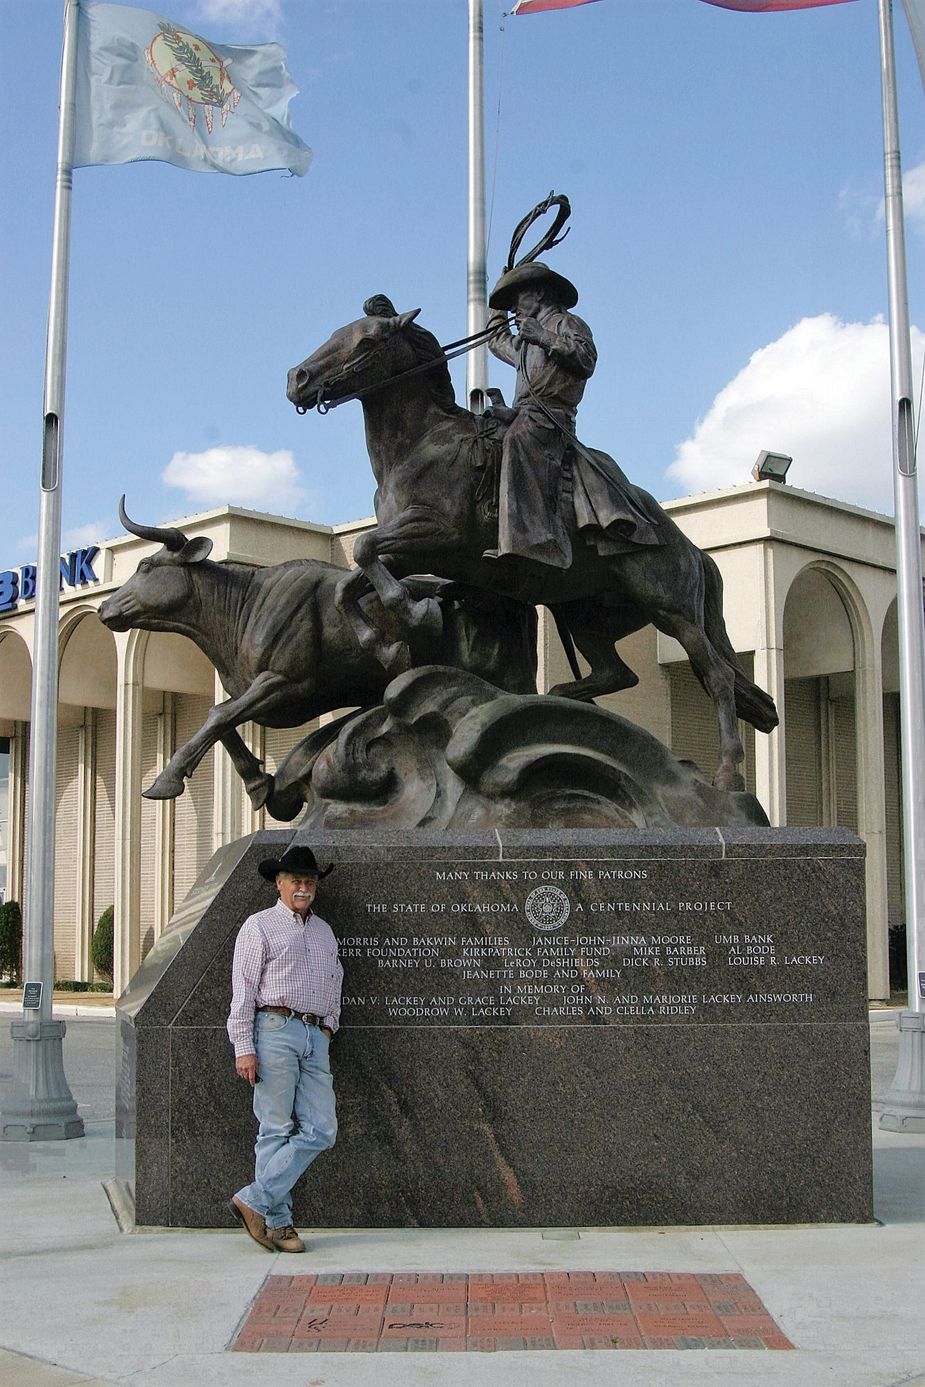 The monument *Headin’ to Market* was dedicated in 2000 in anticipation of the Oklahoma Centennial and is visible in Oklahoma City’s Stockyards City. Photo by Edna Mae Holden